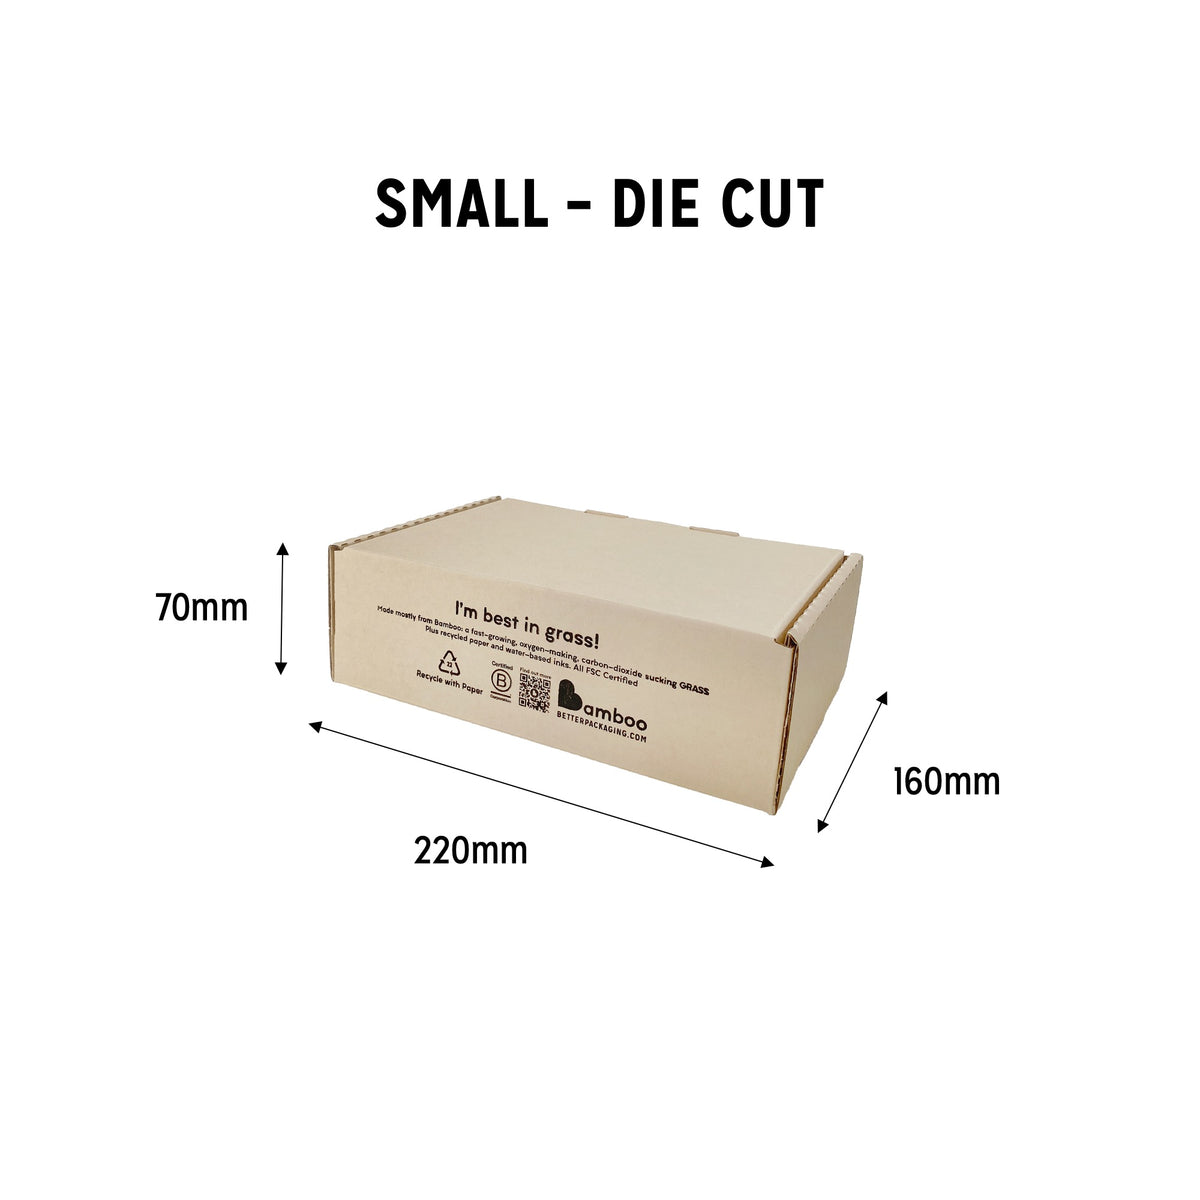 Small Bamboo Box with dimensions. Height 70mm, width 220mm, depth 160mm